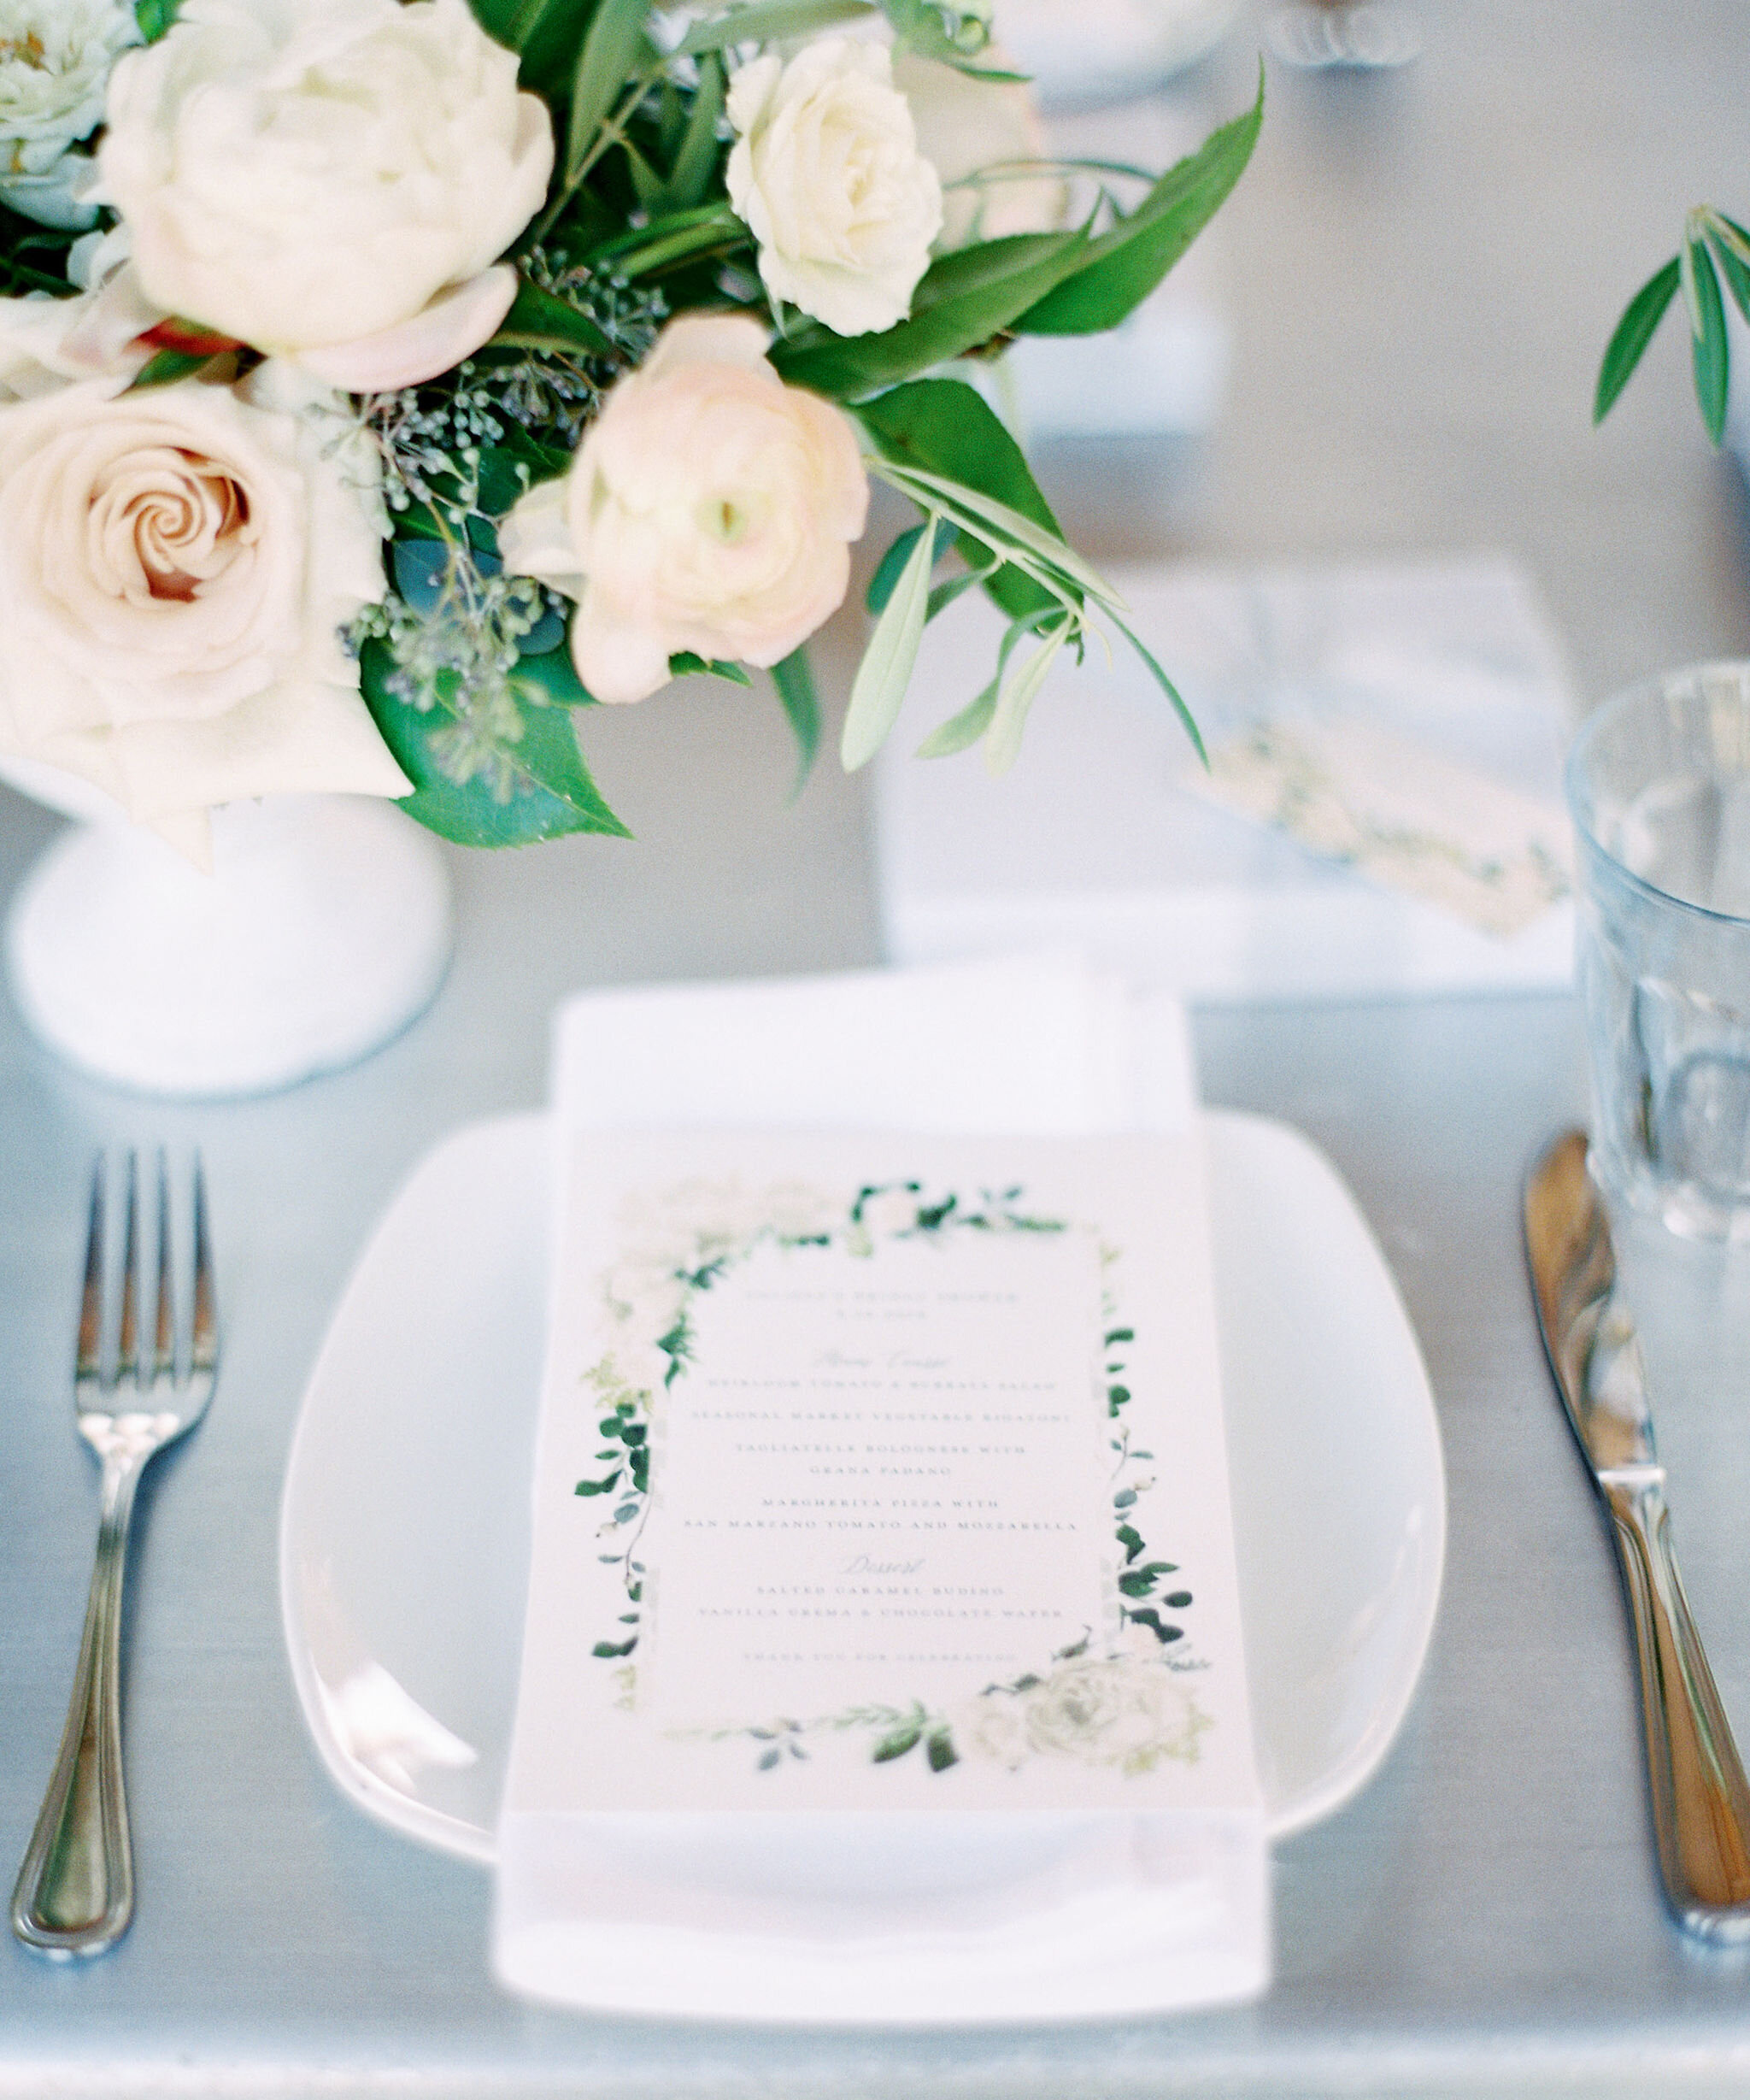 place setting details.jpg